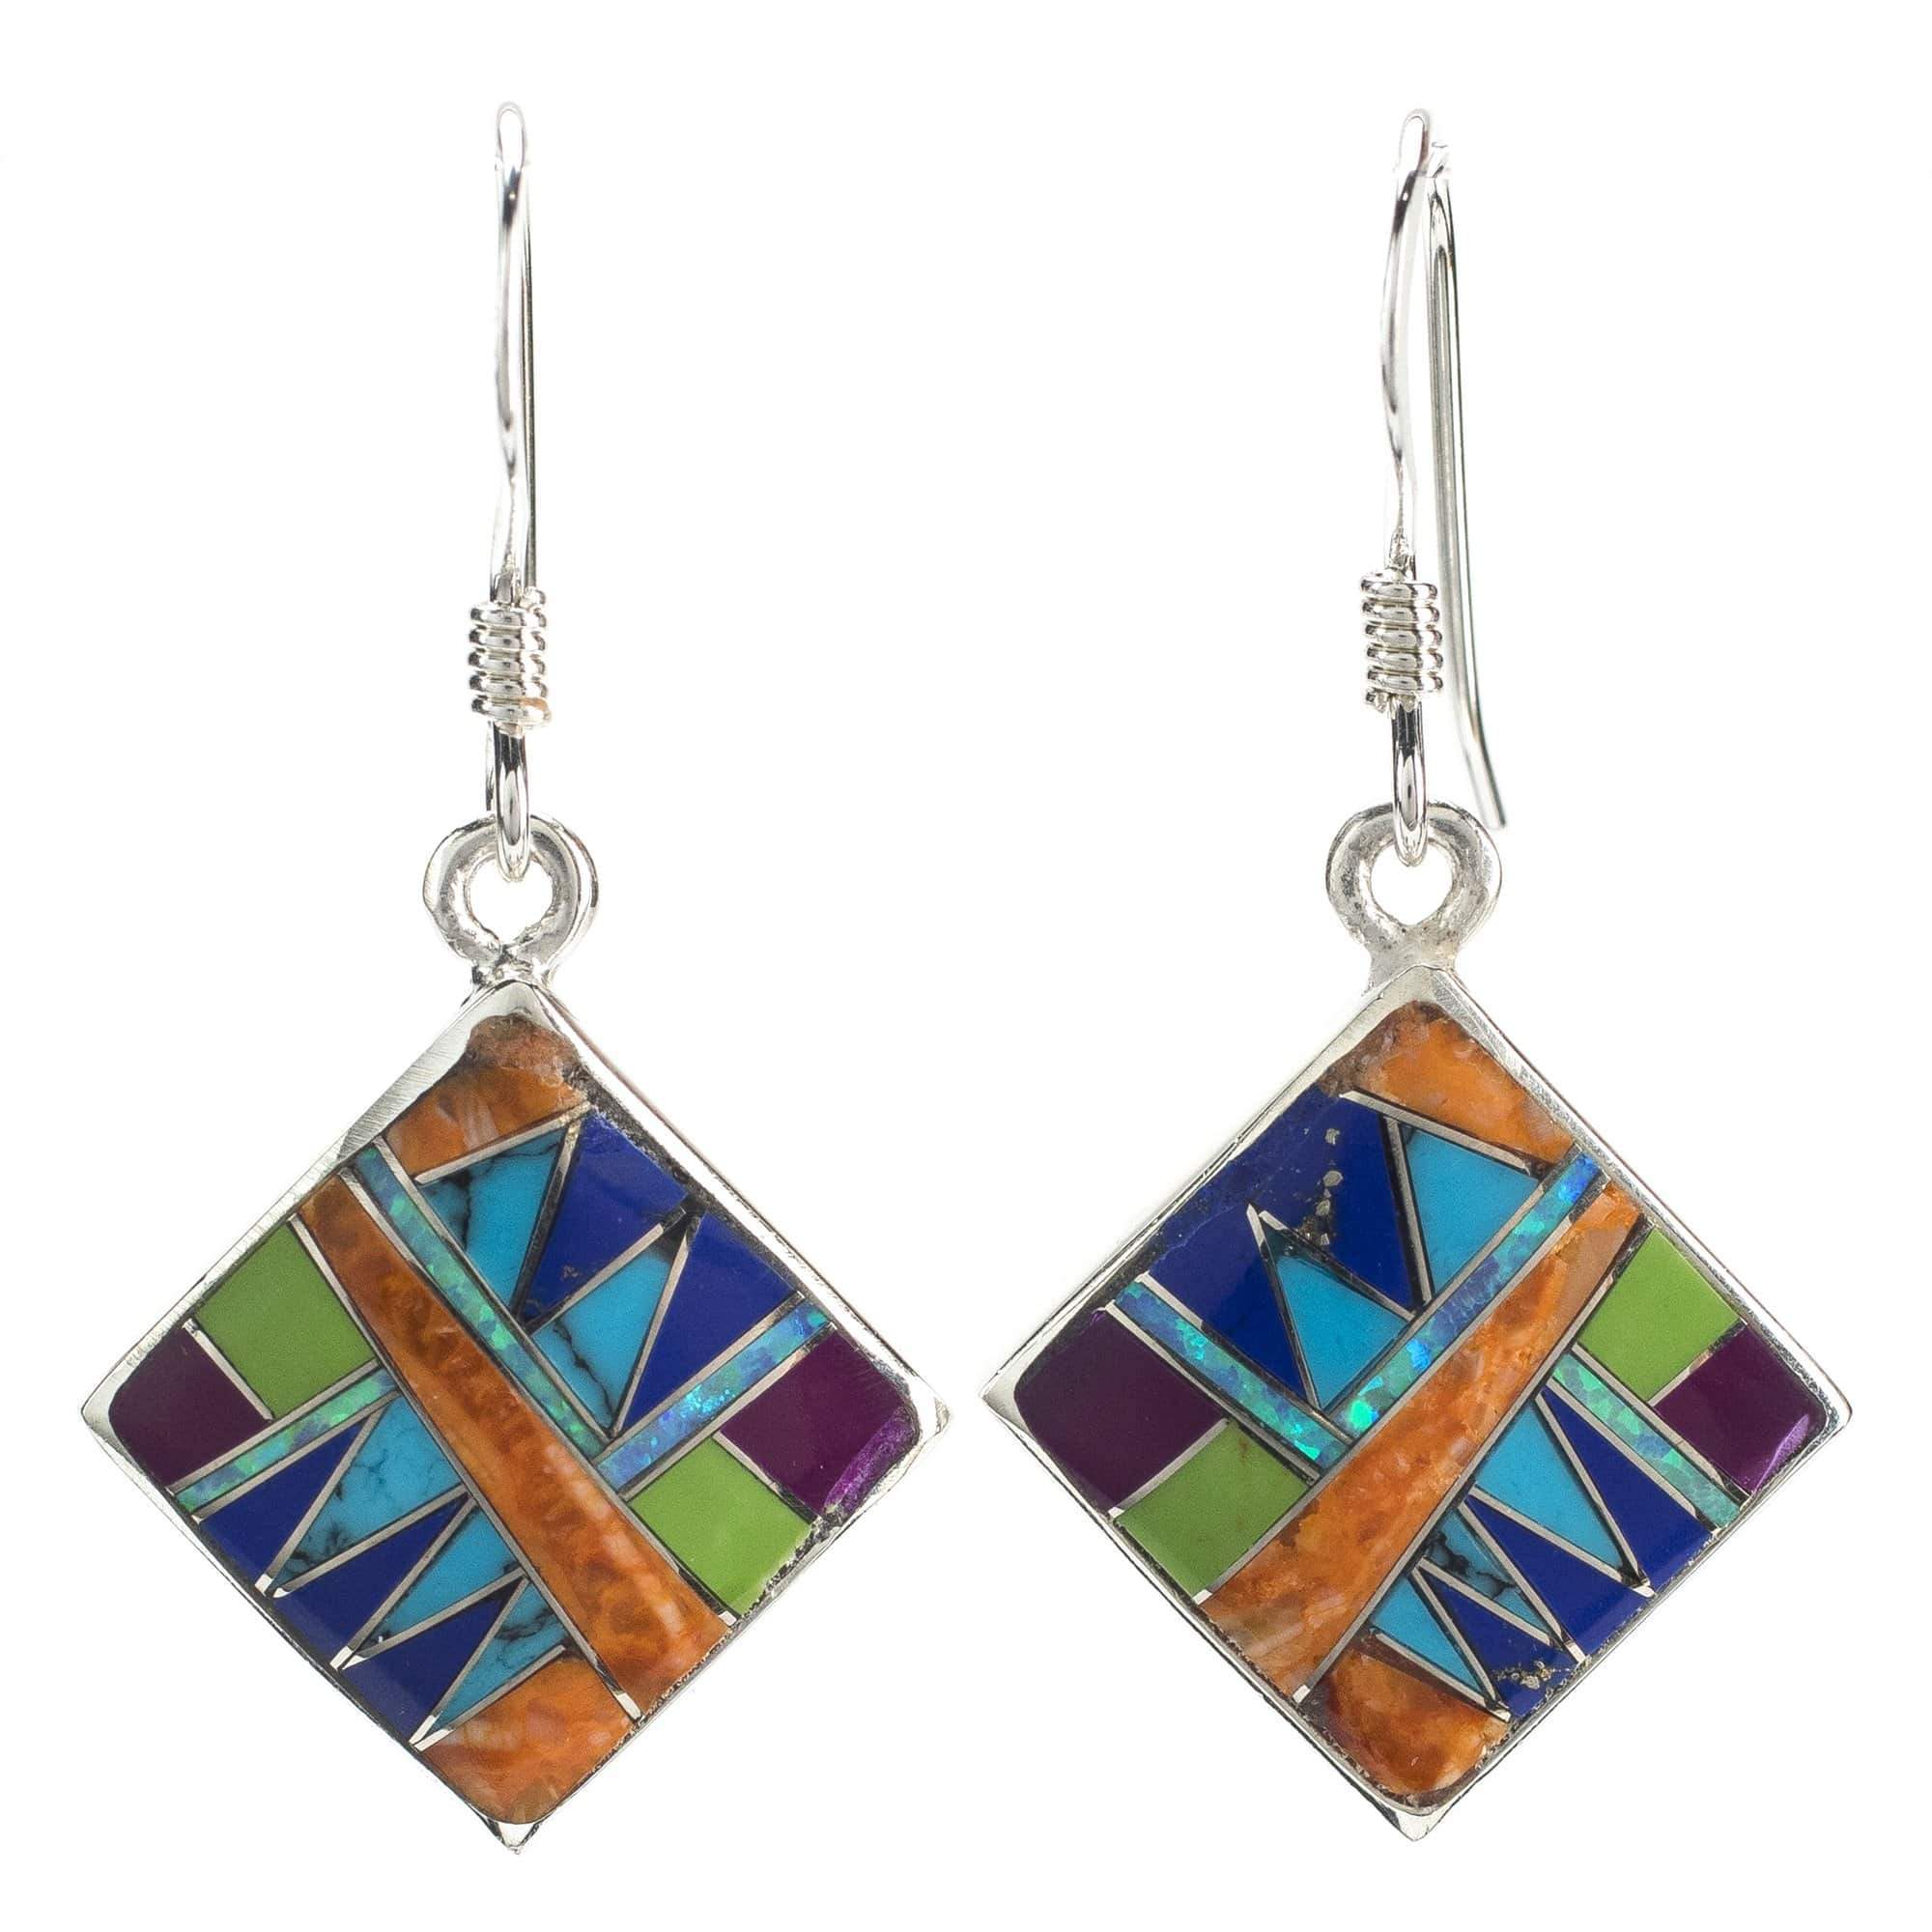 Kalifano Southwest Silver Jewelry Multi Gemstone Square 925 Sterling Silver Earring with French Hook USA Handmade with Aqua Opal Accent NME.2016.MT